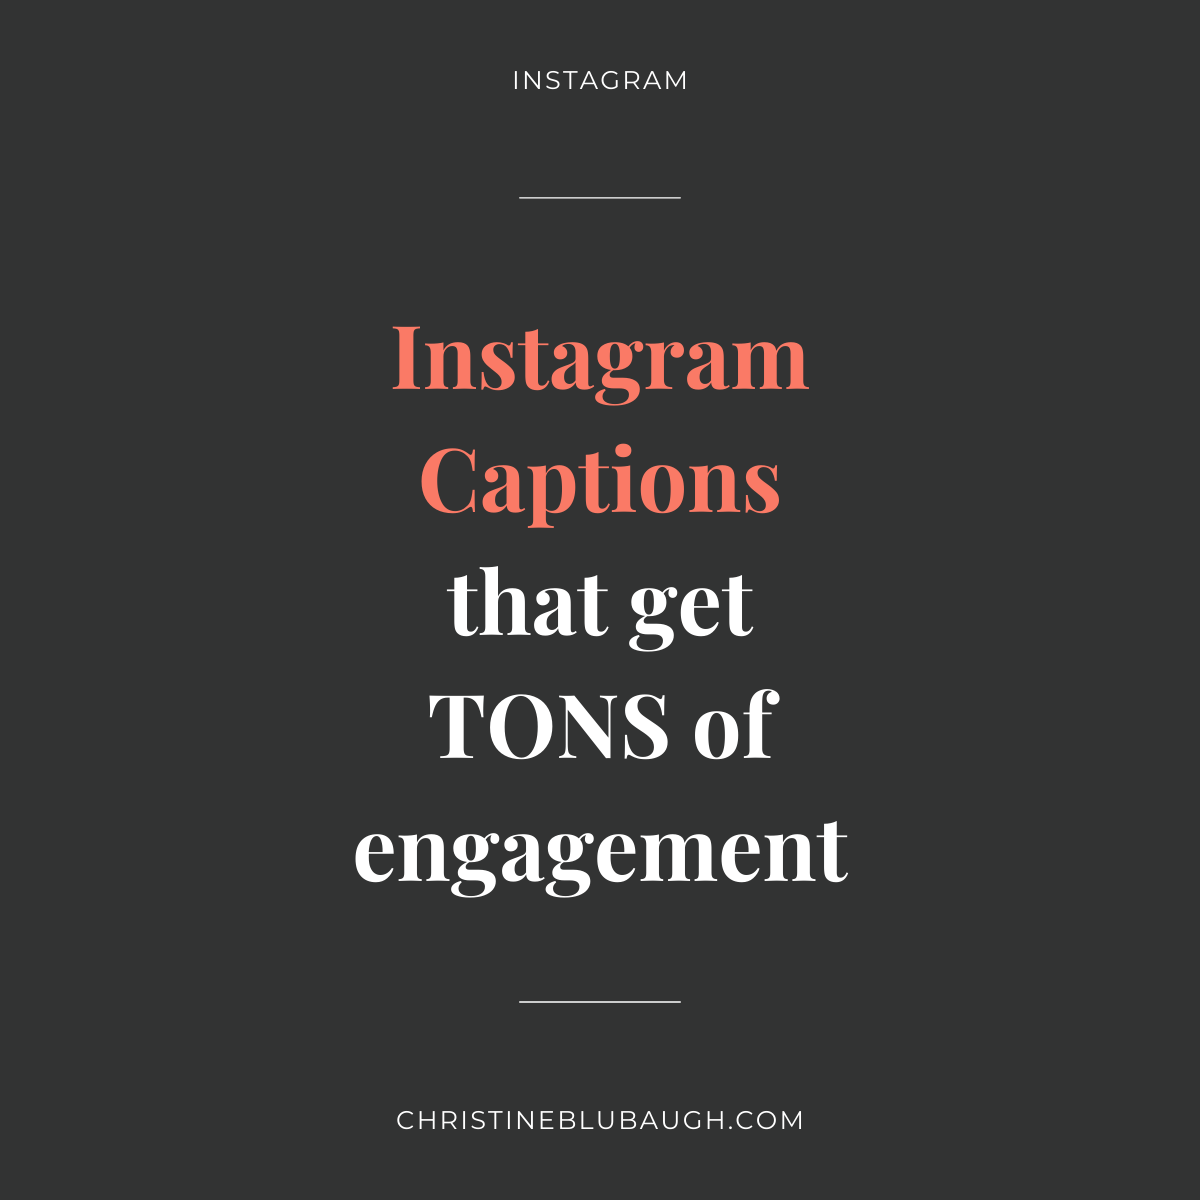 Instagram Captions that Get Tons of Engagement